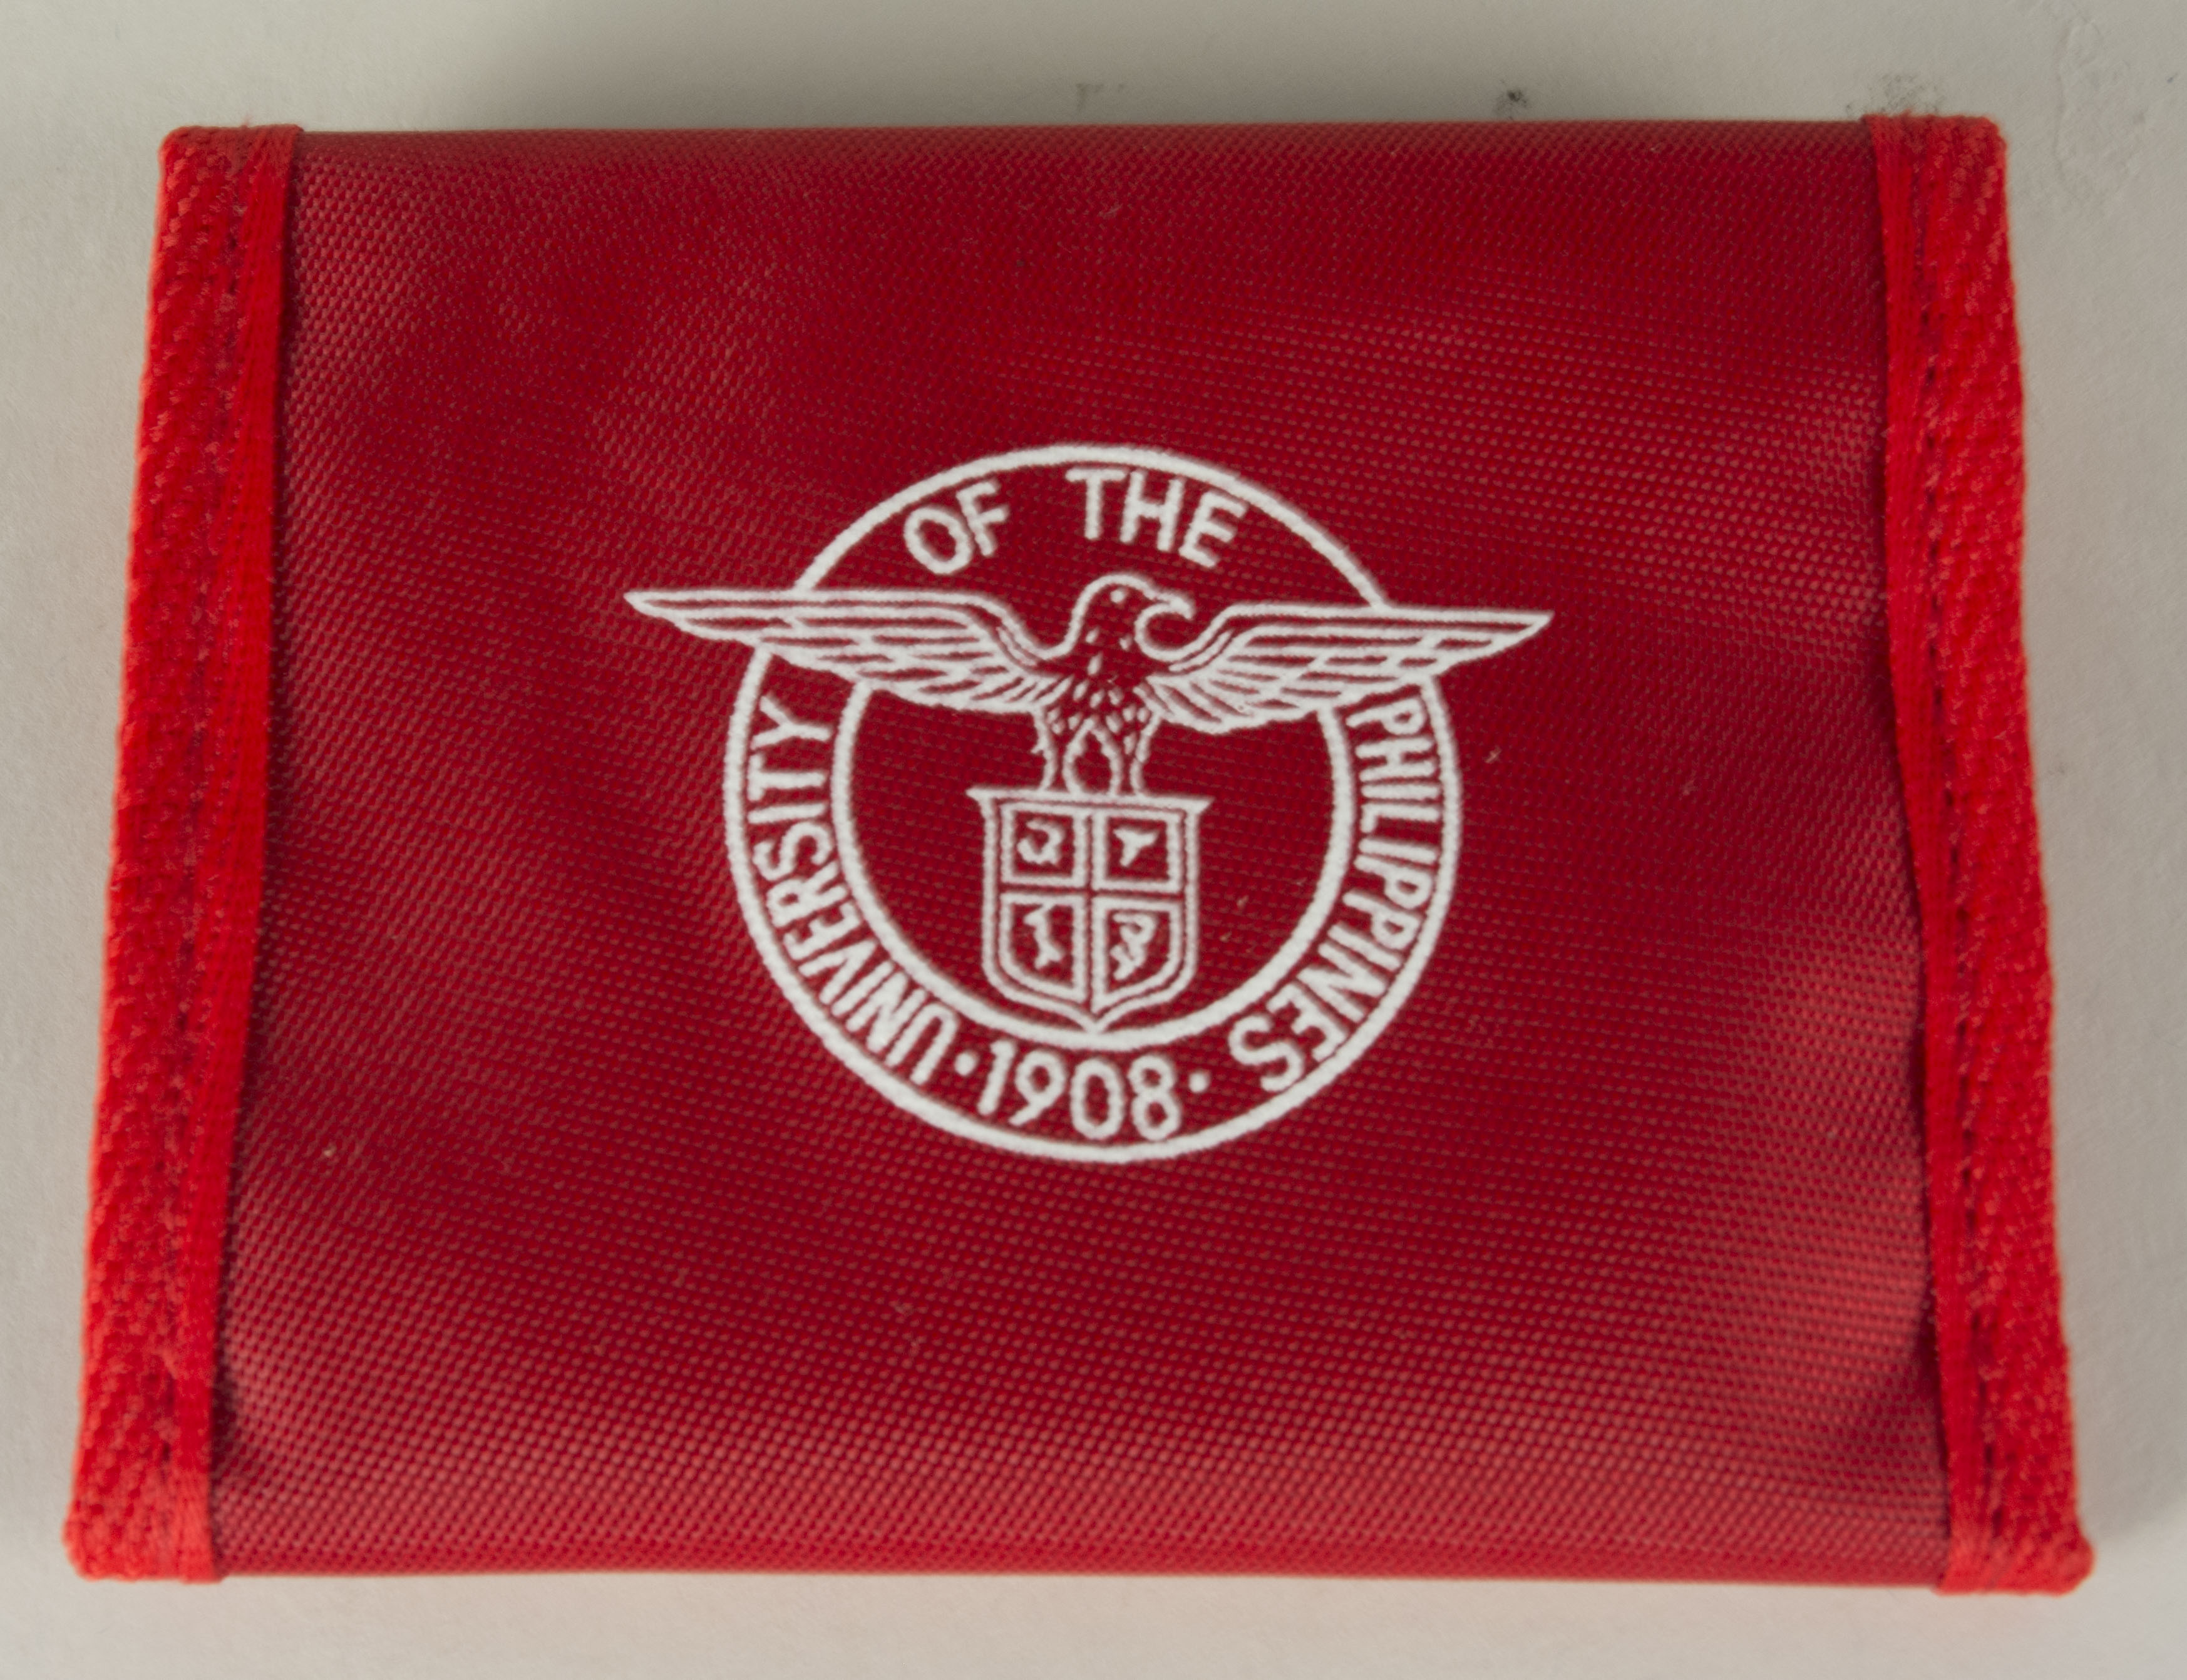 University of the Philippines wallet owned by SalazarSalazar said the objects were made in 2008 for the University of the Philippines centennial. They were gifts from a schoolmate, given to Salazar on a  visit to the Philippines. All writing on the objects is in English. Salazar said the university was a big part of his life.Between school and work, he was connected to the University for 11+ years. Salazar said he has fond memories and many close relationships from the University. Any views, findings, conclusions, or recommendations expressed in this story do not necessarily represent those of the National Endowment for the Humanities. 